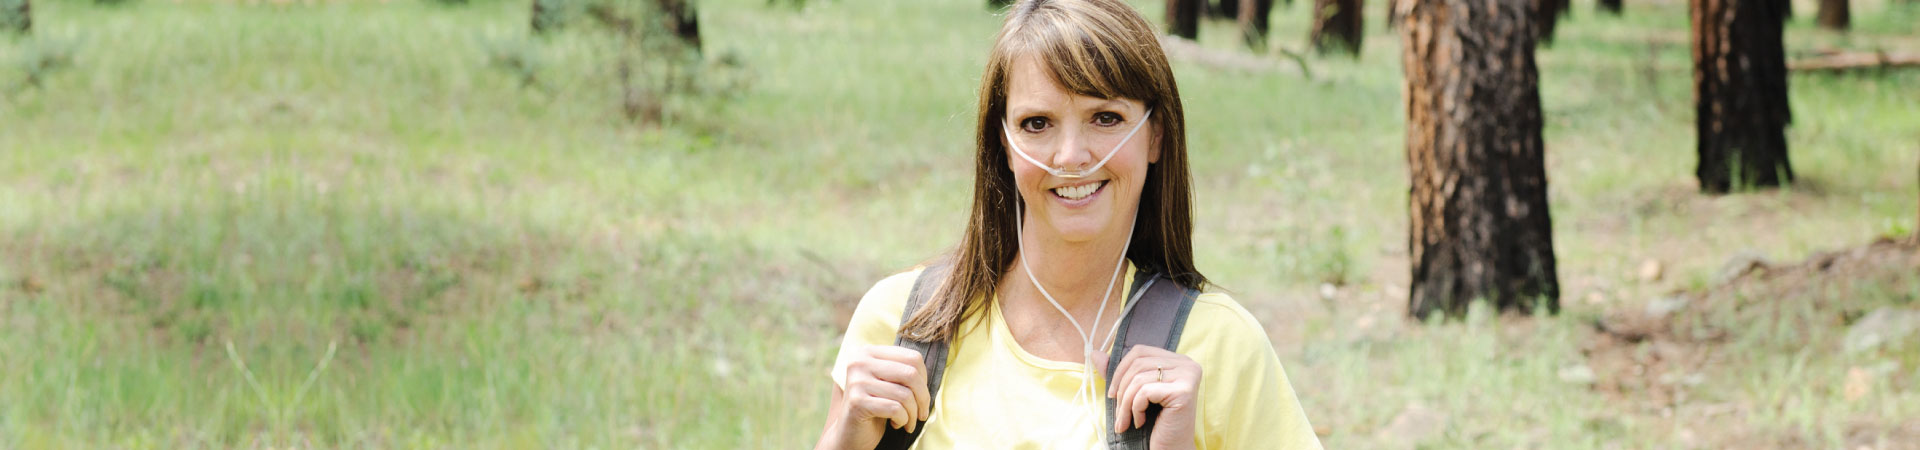 Woman wearing backpack and oxygen equipment while hiking in Cincinnati